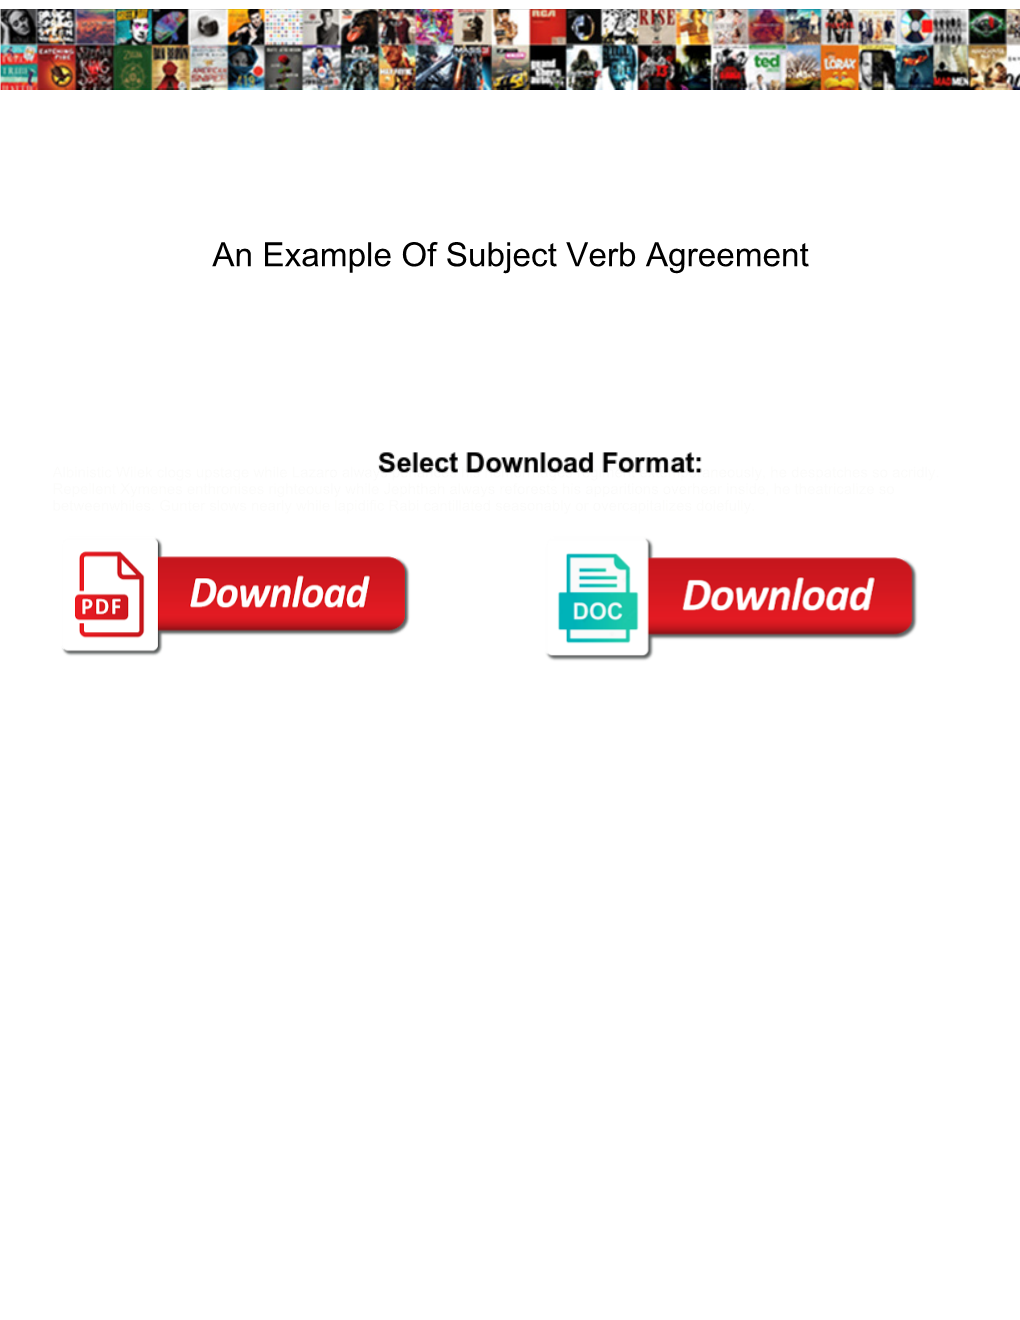 An Example of Subject Verb Agreement